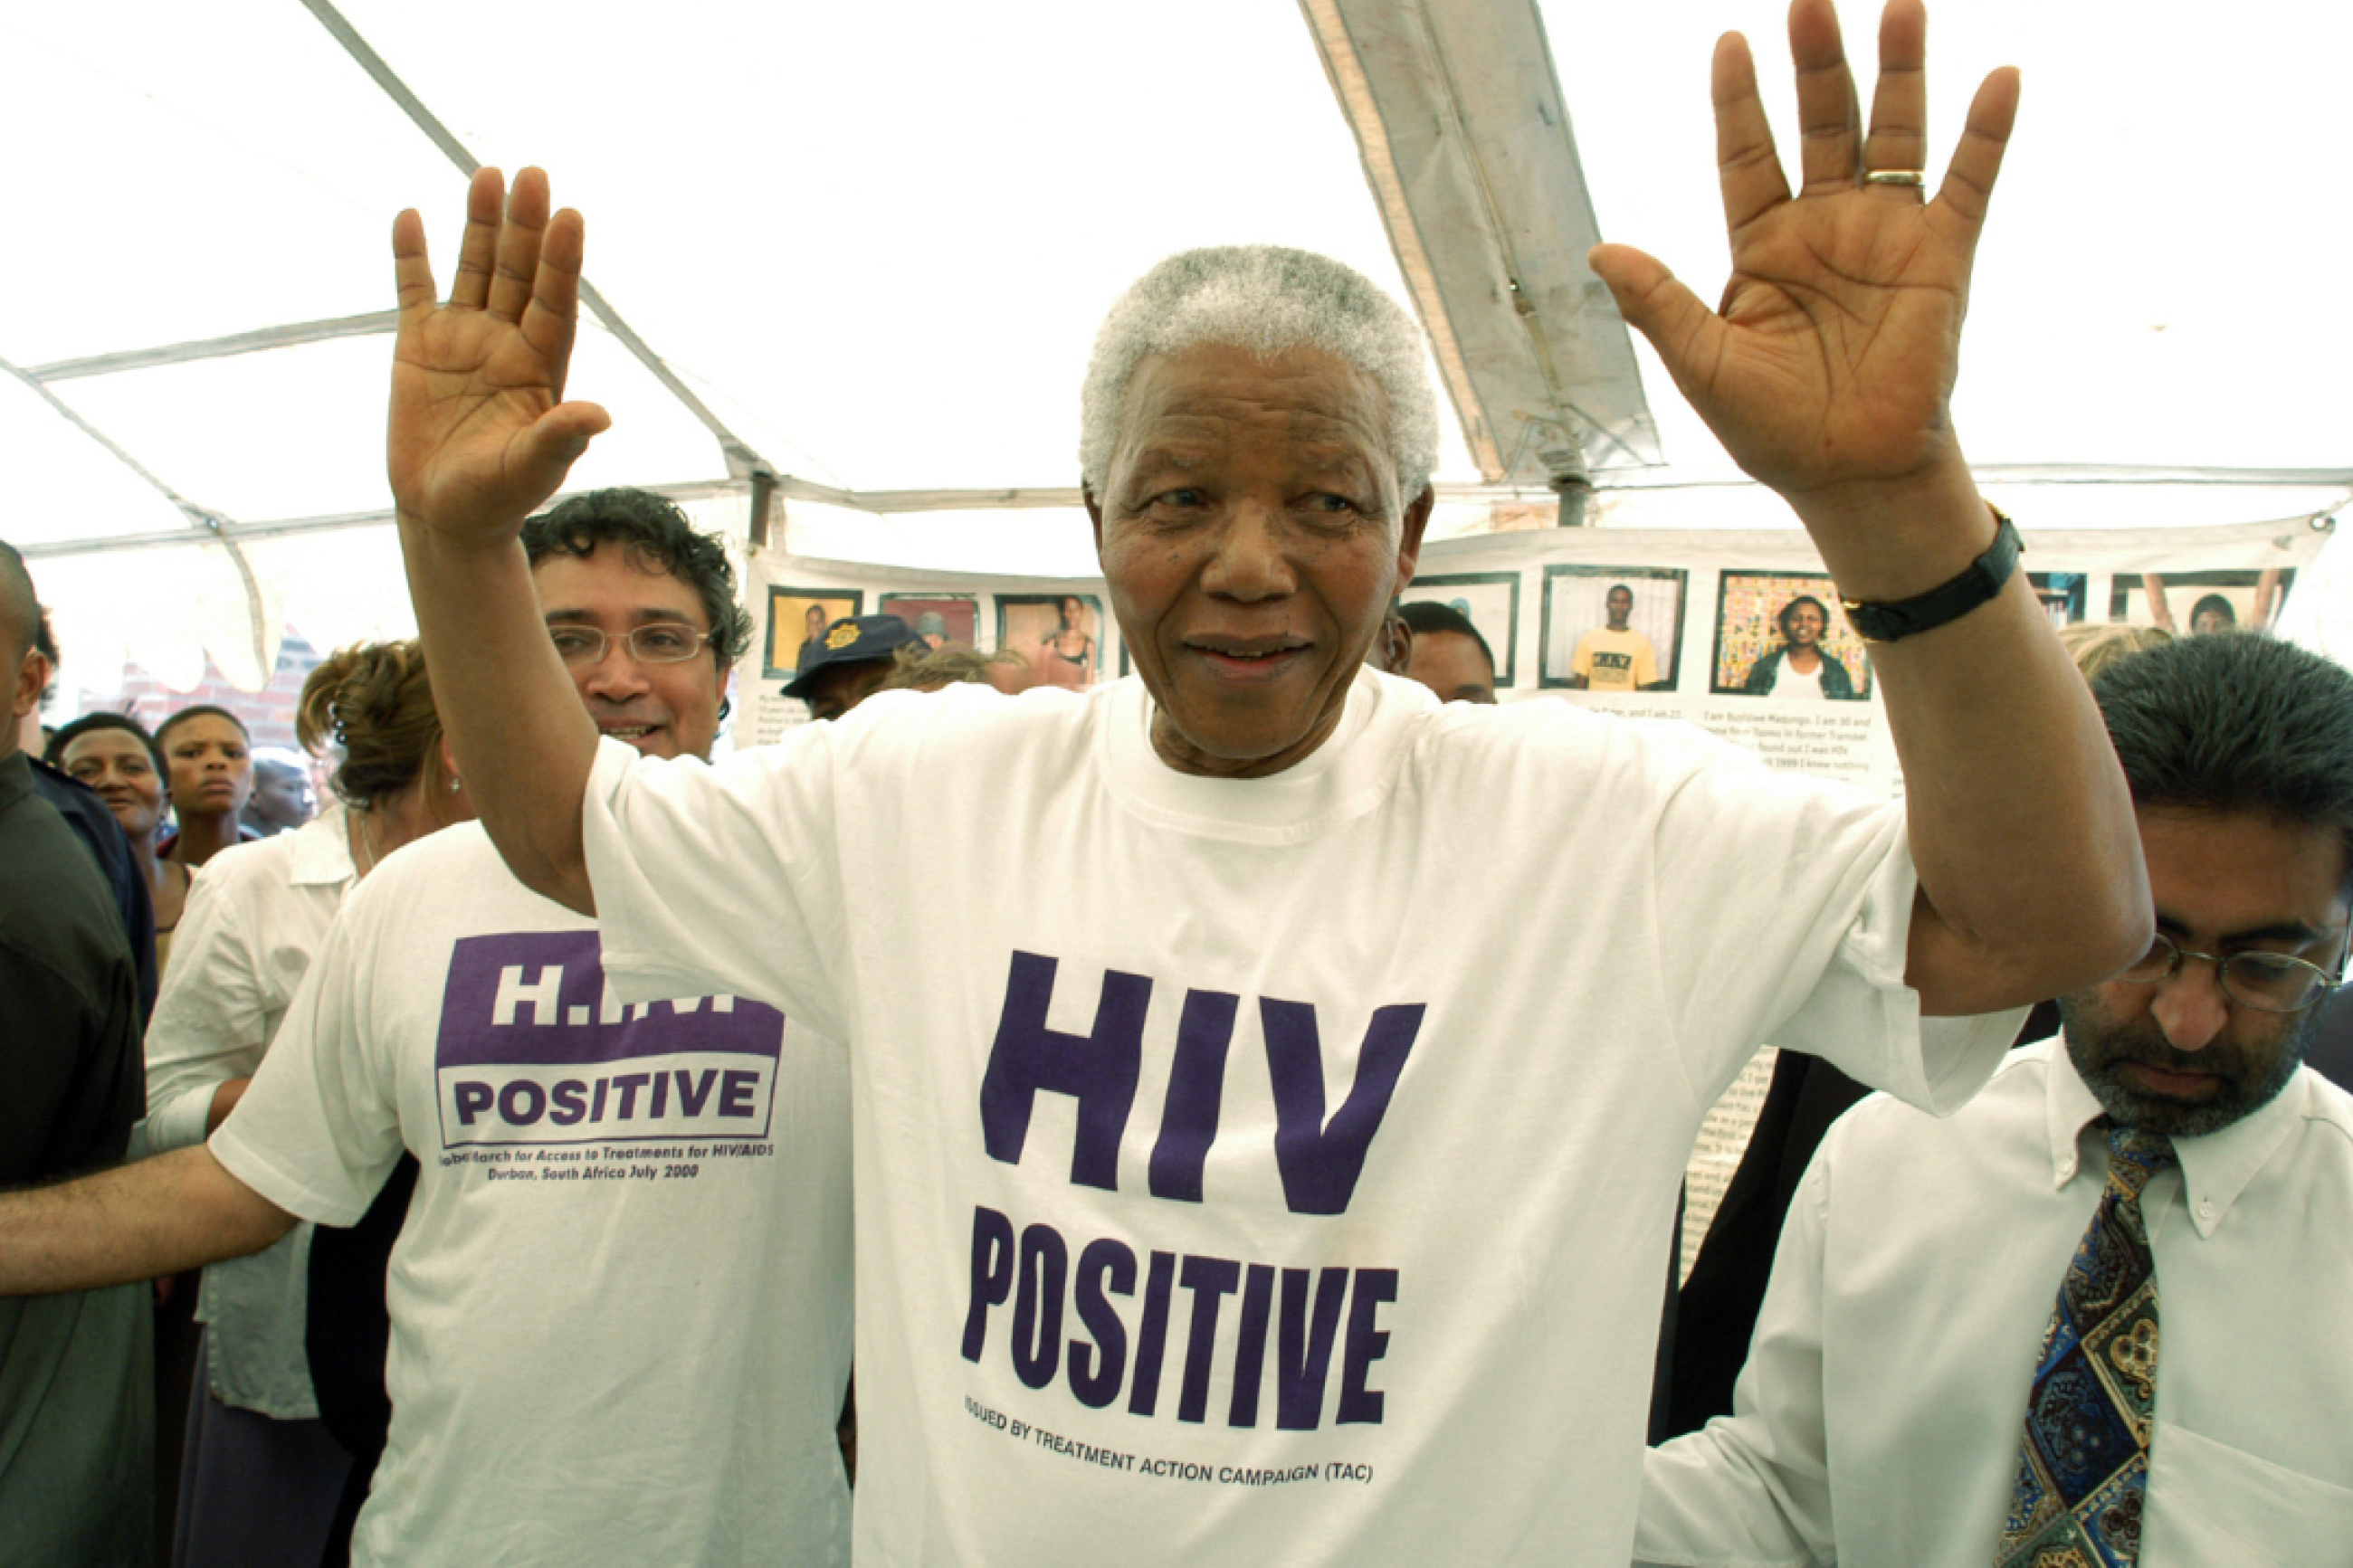 Former president of South Africa Nelson Mandela—wearing a white t-shirt with HIV POSITIVE in purple printed on the front—visits the township of Khayelitsha in Western Cape, South Africa. Photo by Media24/Gallo Images/Getty Images